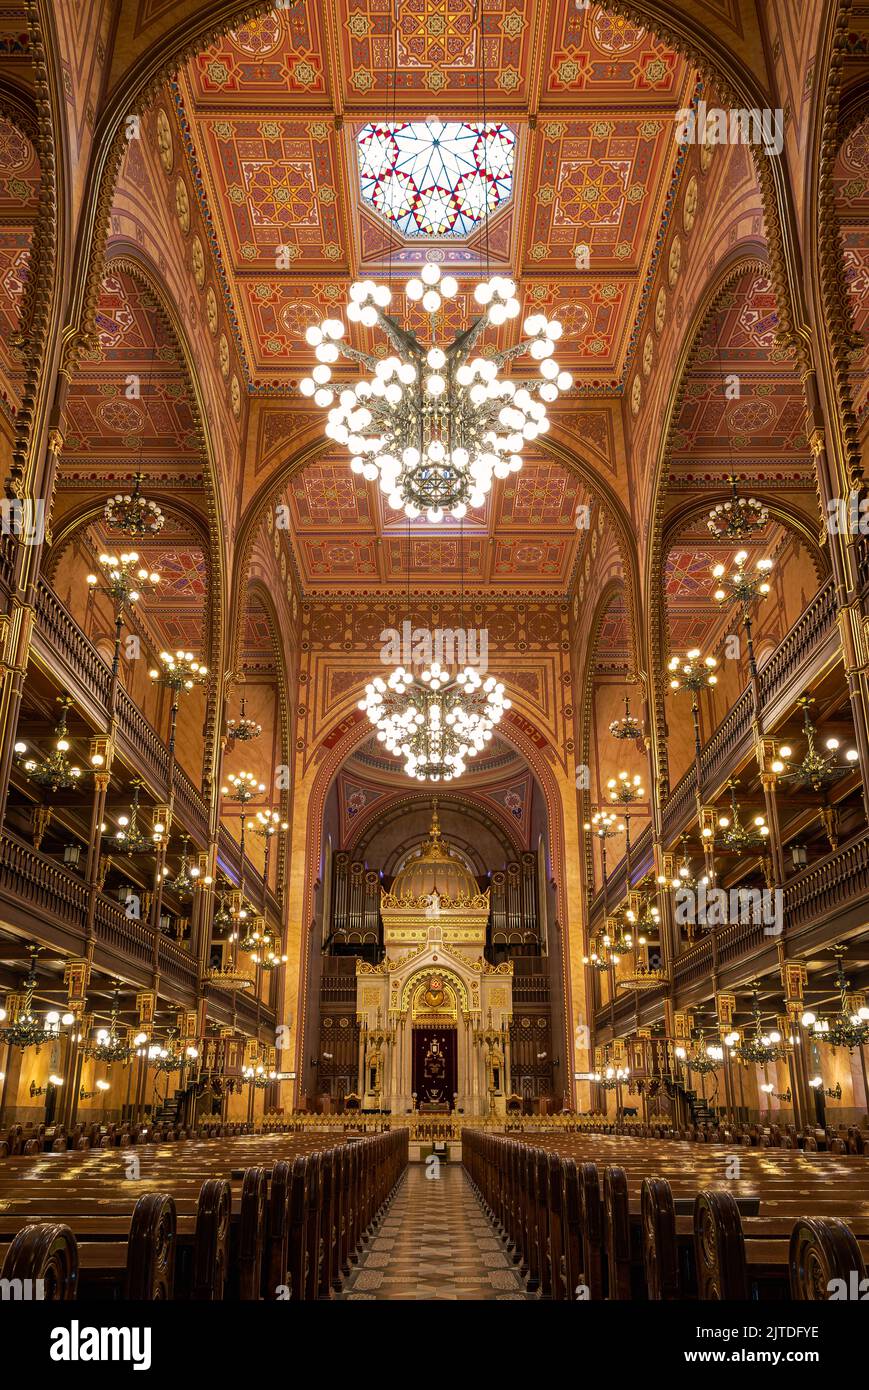 Budapest, Hungary. Inside of the Dohany street Synagogue. This is an Jewish memorial center also known as the Great Synagogue or Tabakgasse Synagogue. Stock Photo